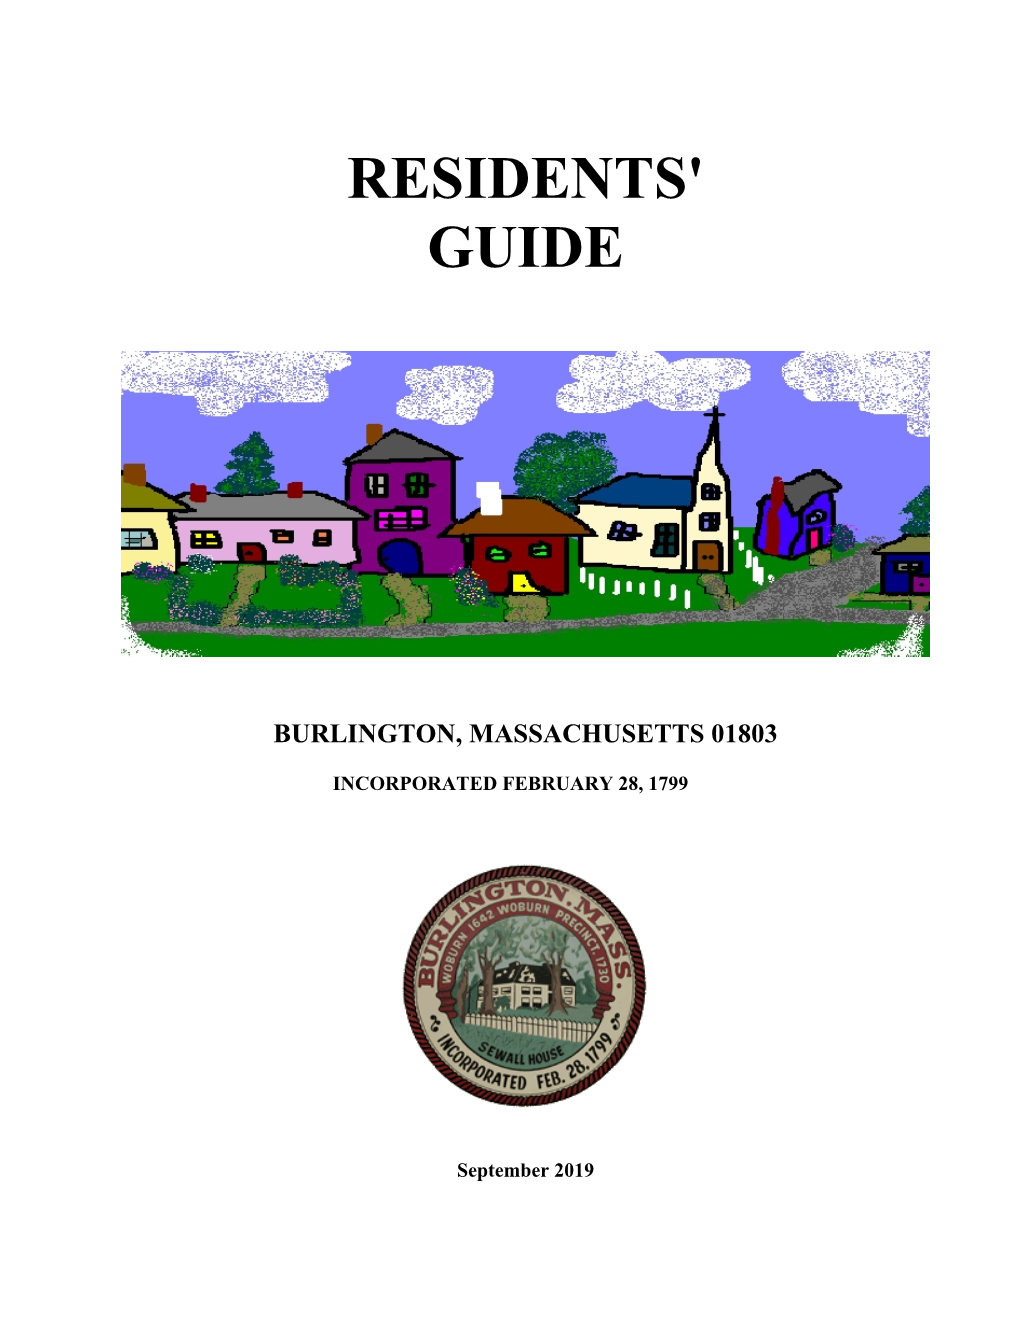 Residents' Guide